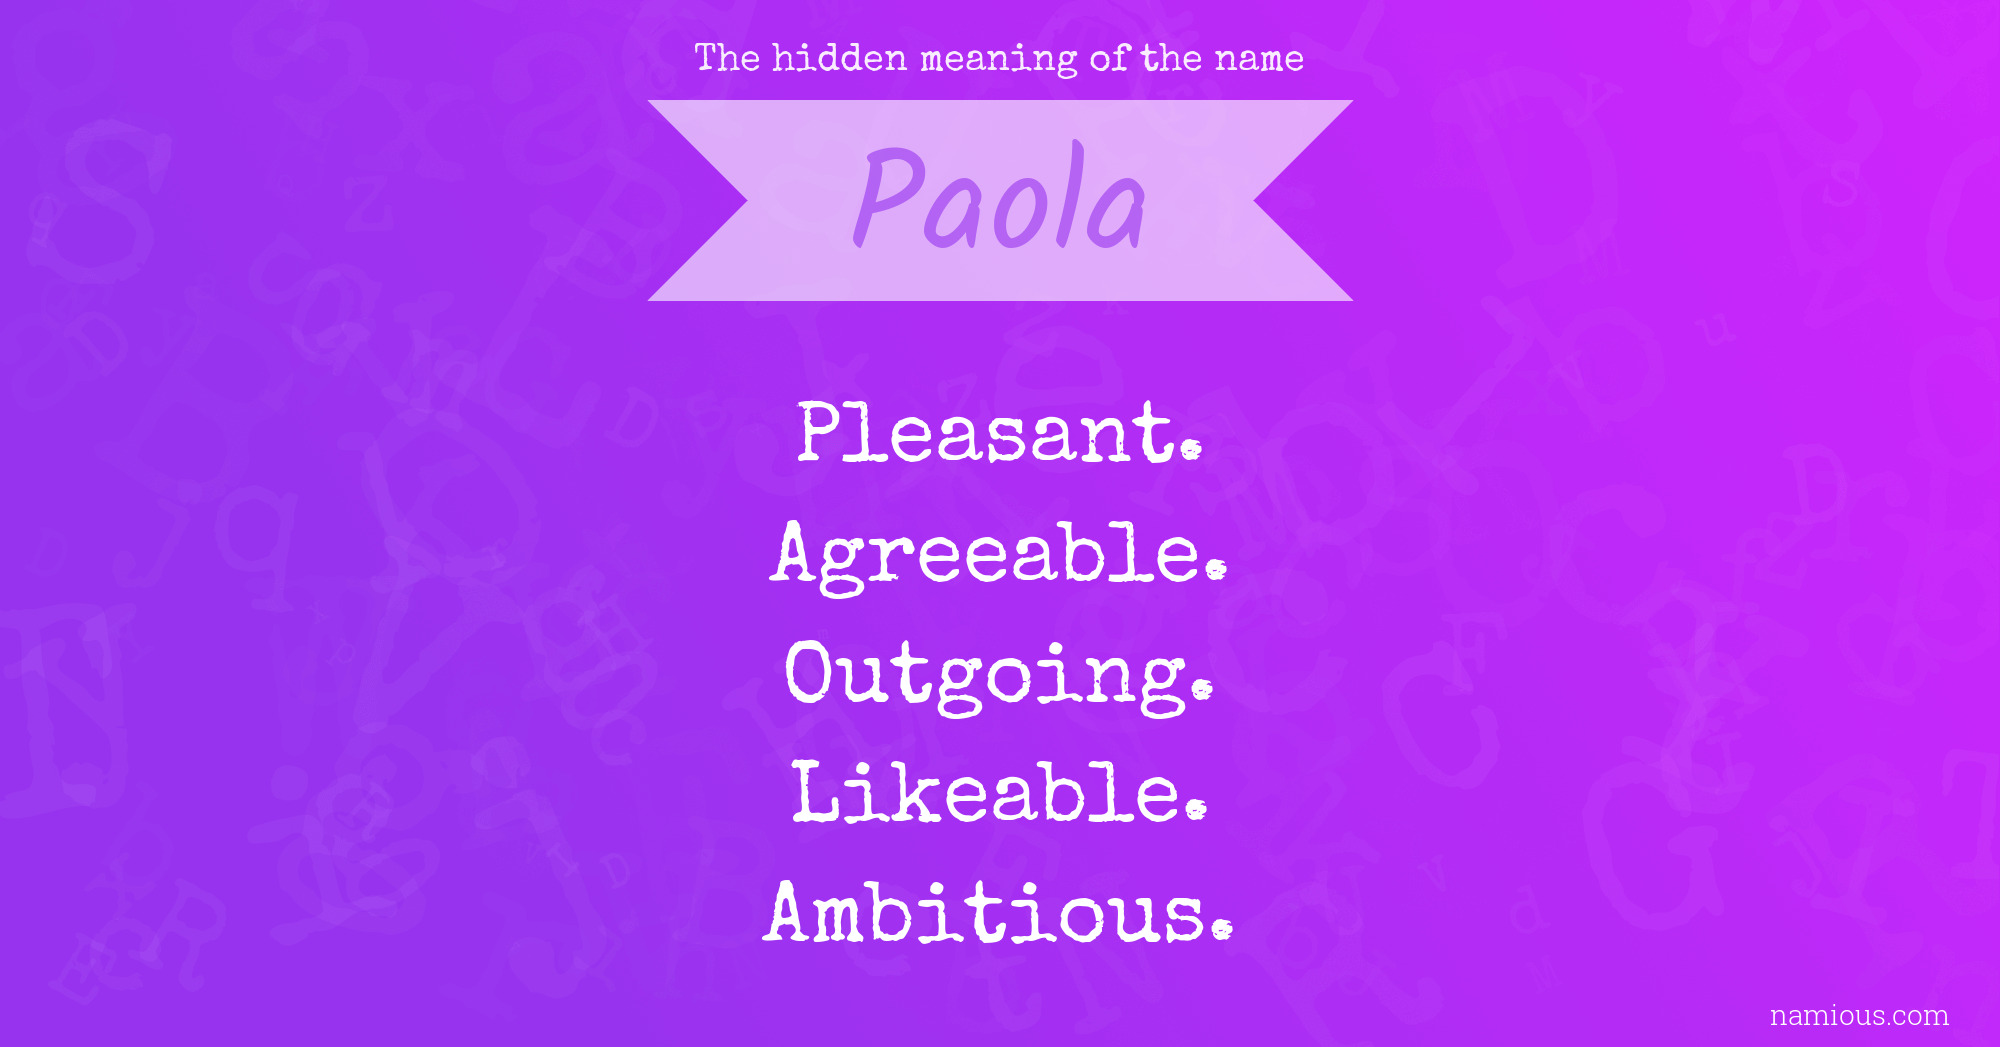 The hidden meaning of the name Paola